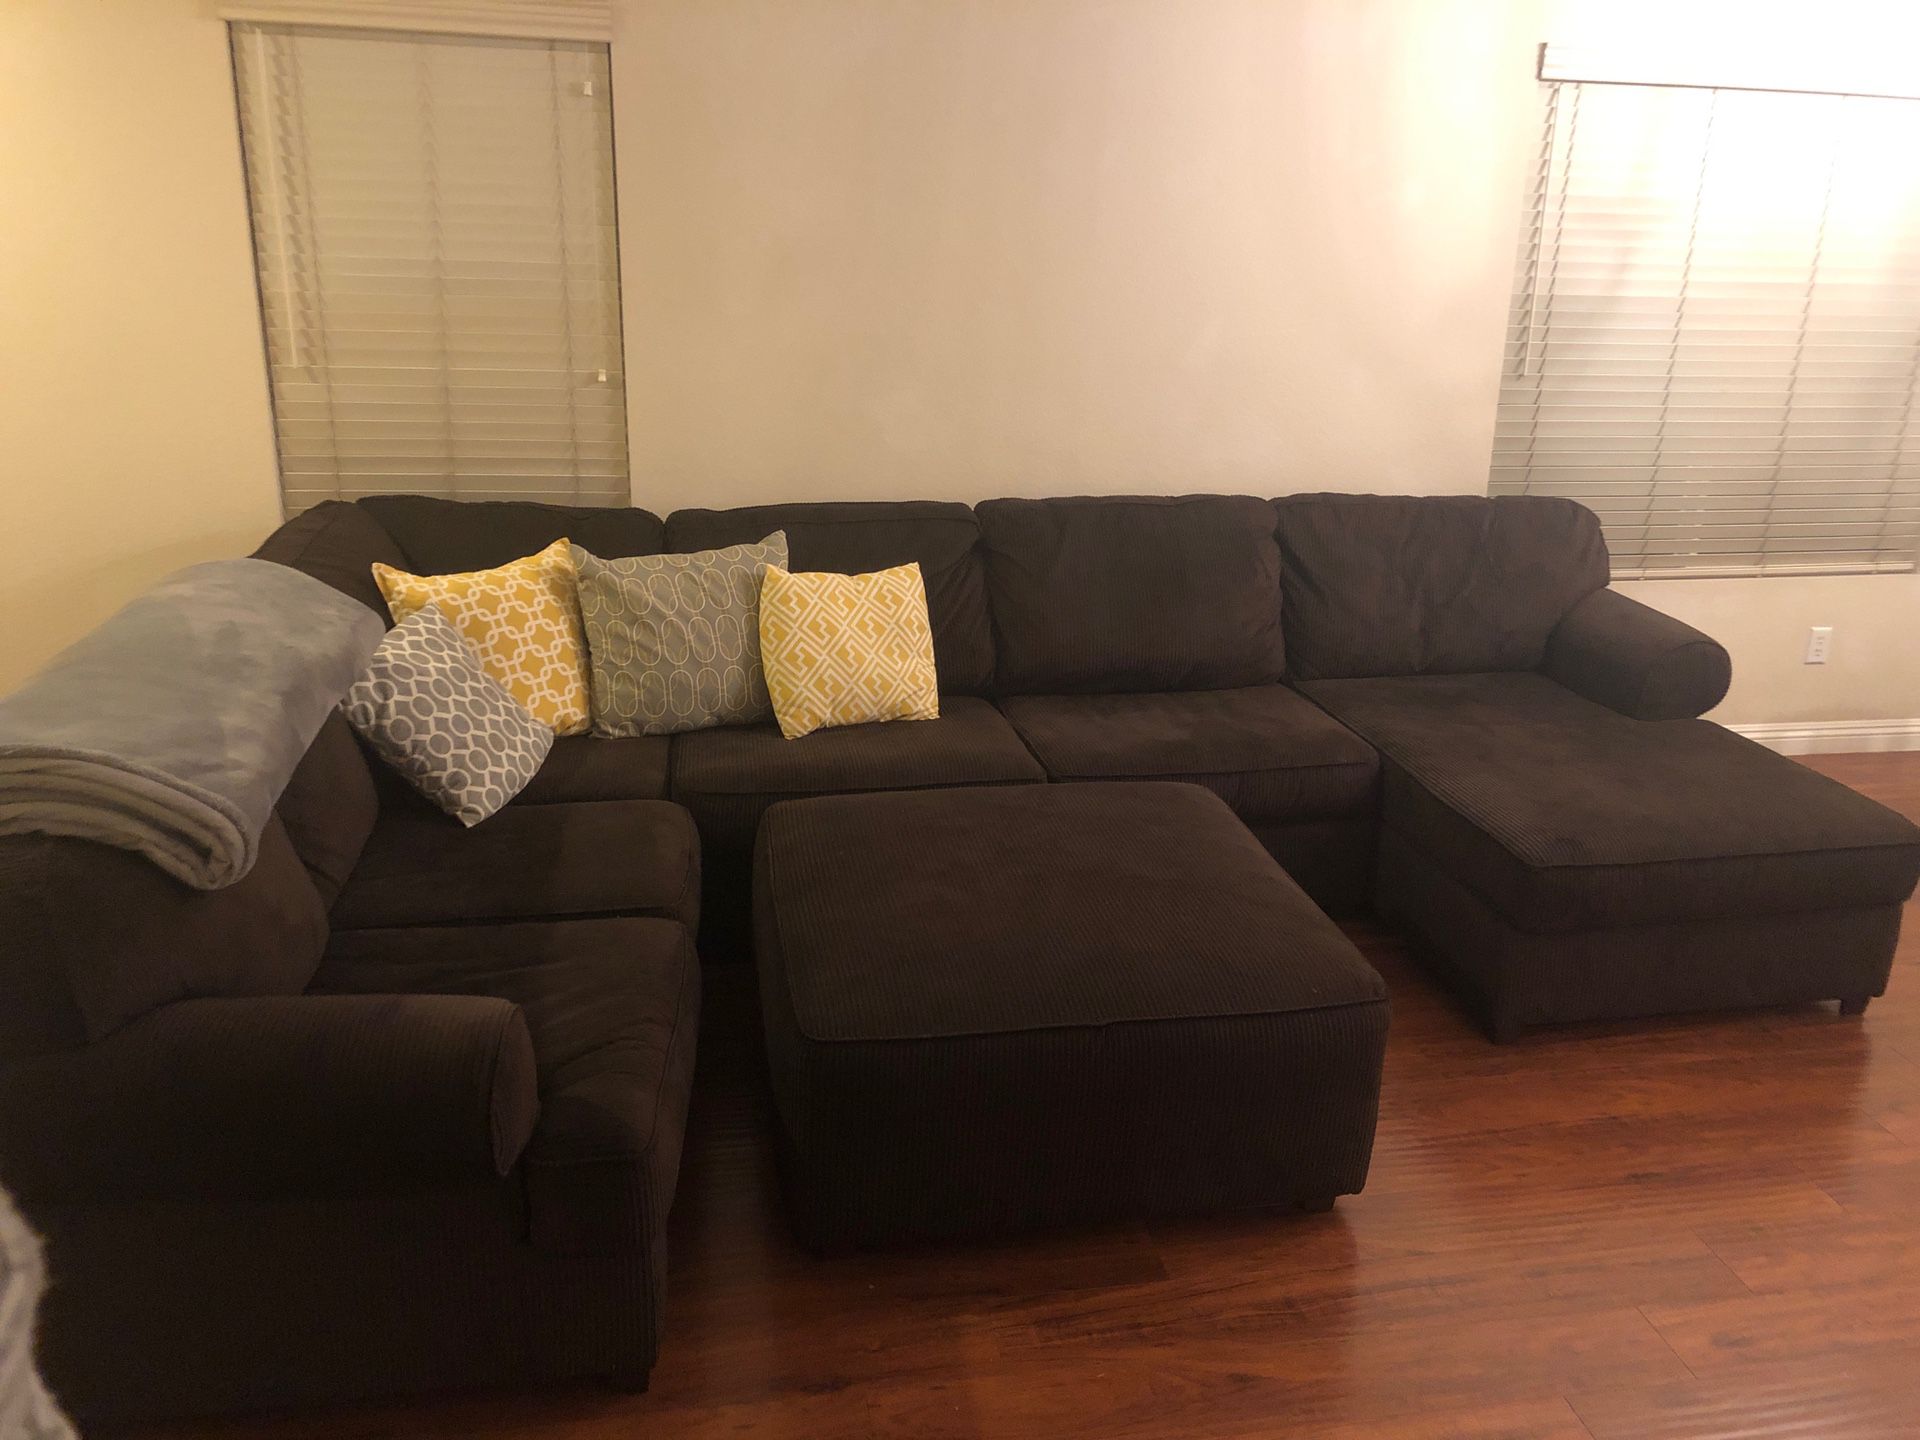 4 Piece Sectional couch w/chaise lounge & ottoman